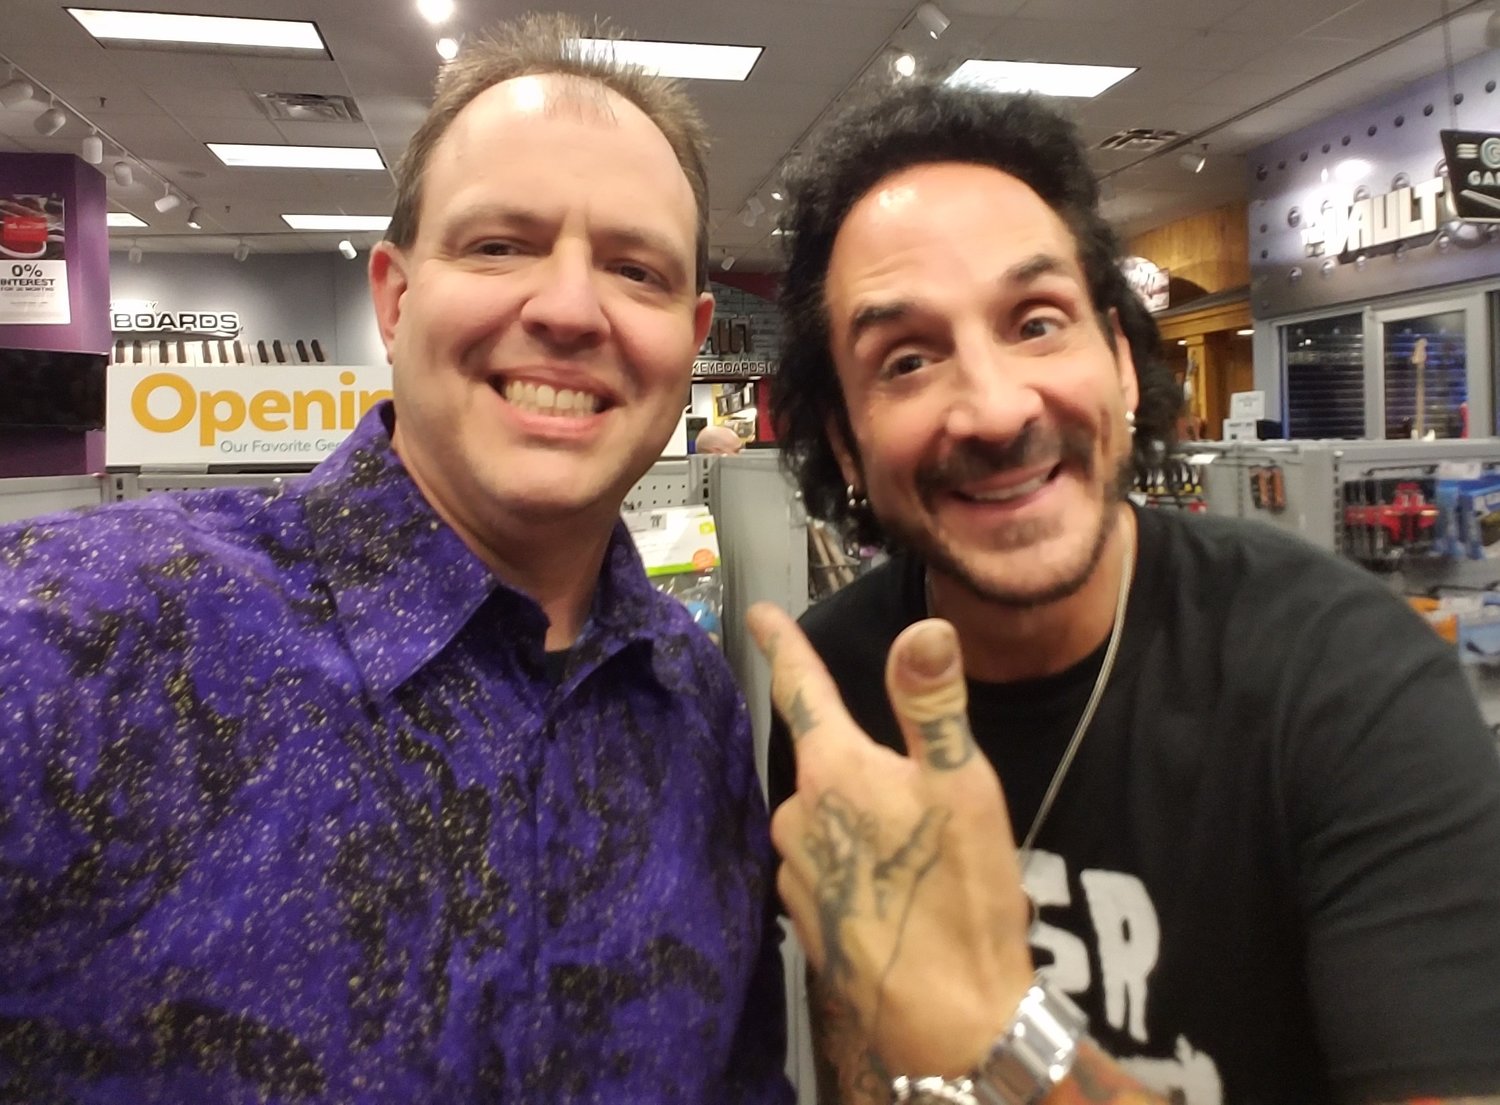 Fritz Scherz, left, with Deen Castronovo, who sings on the singles, “The Hands of Time” and “Brothers.”